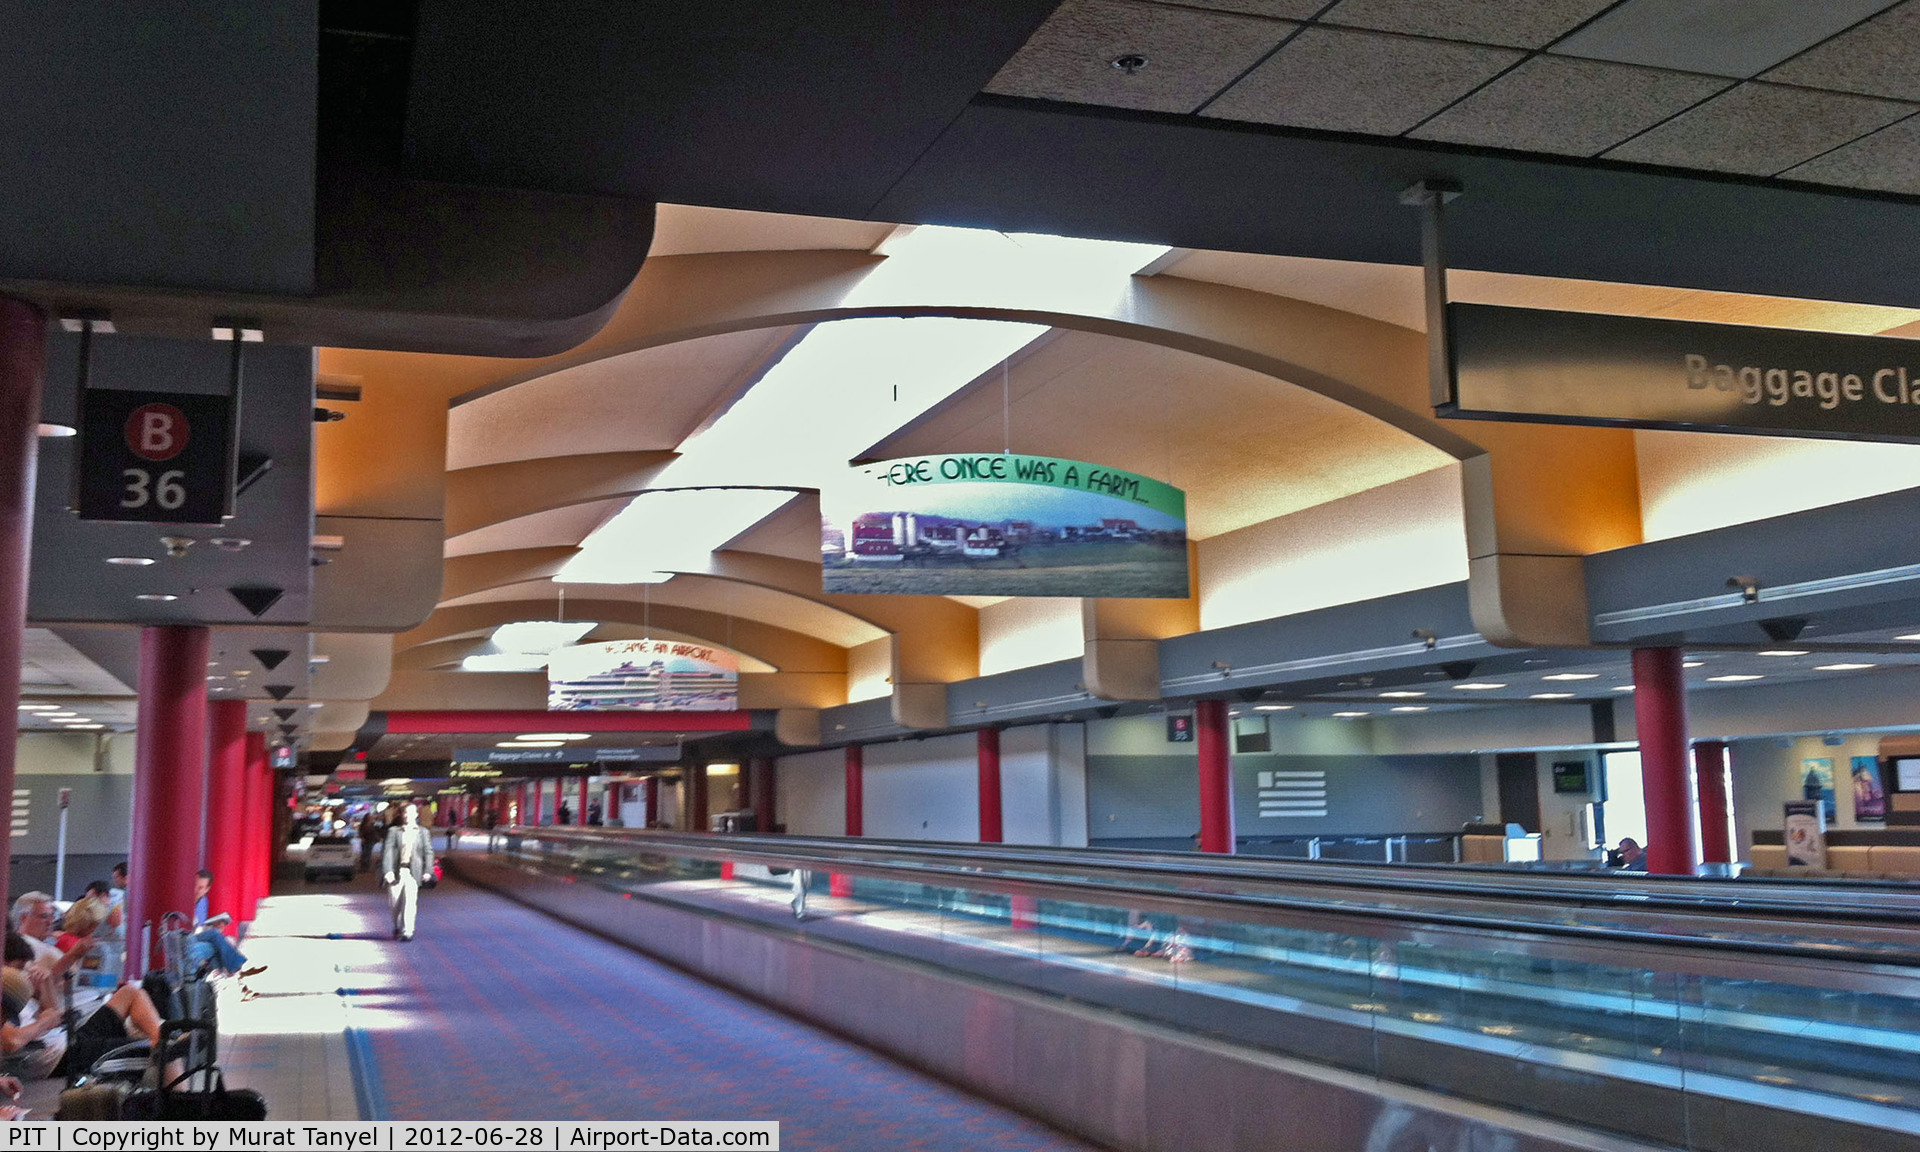 Pittsburgh International Airport (PIT) - Inside Concourse B